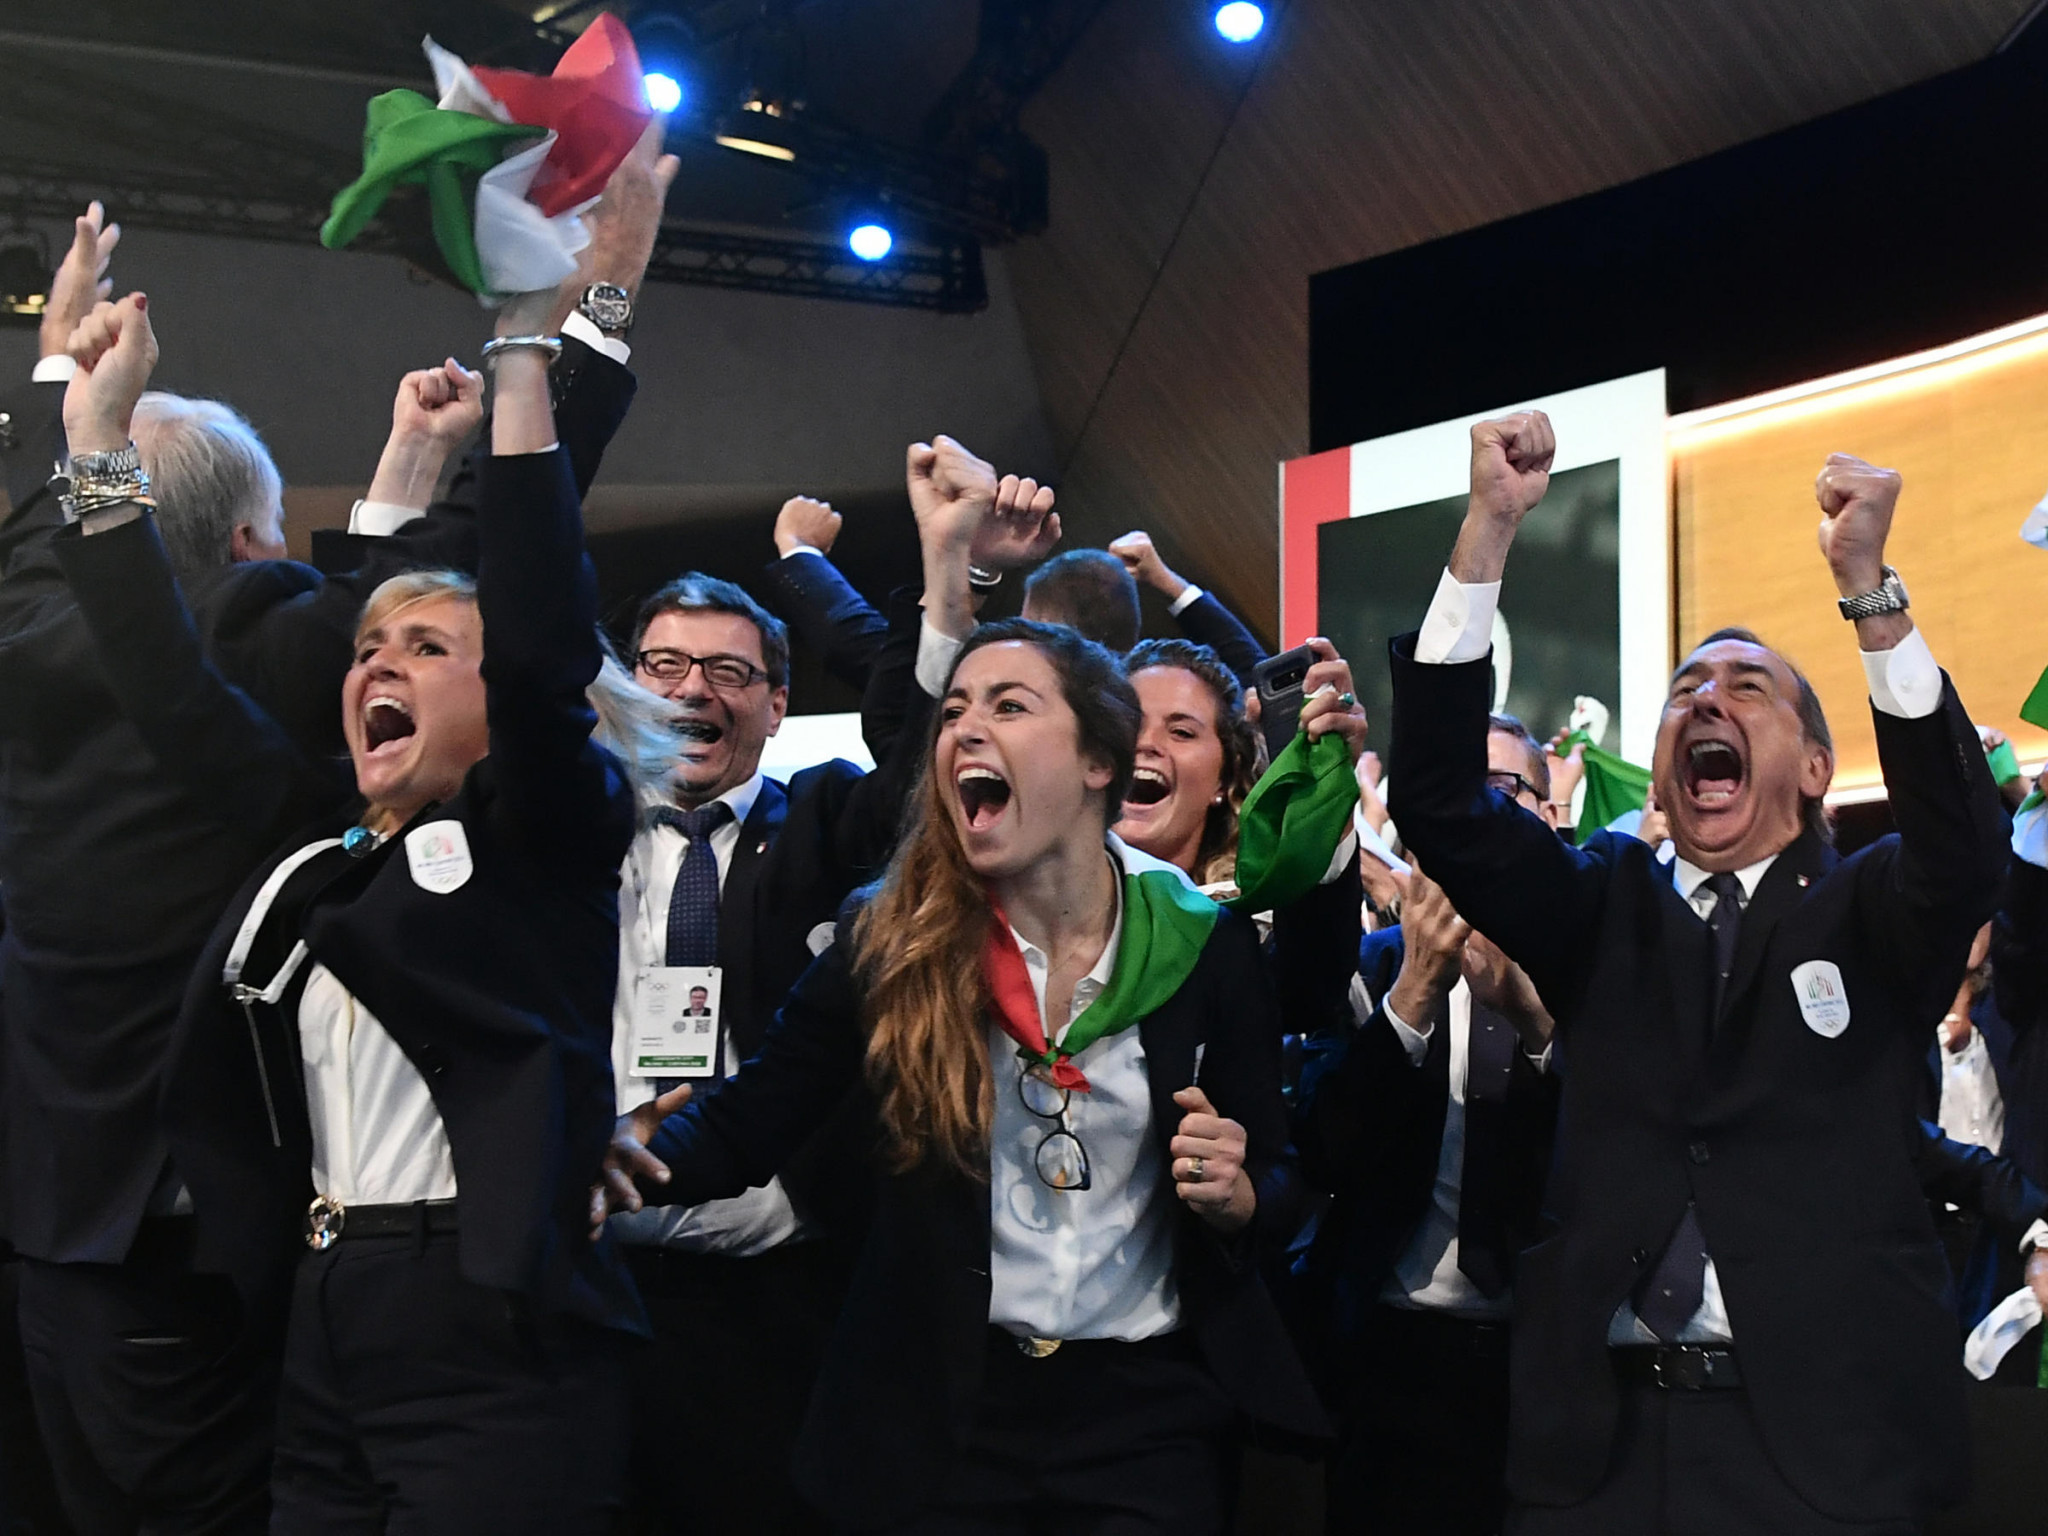 Milan Cortina 2026 is hoping to tap into the excitement of Italy being awarded the Winter Olympic and Paralympic Games to help inspire the youth of Italy ©Getty Images